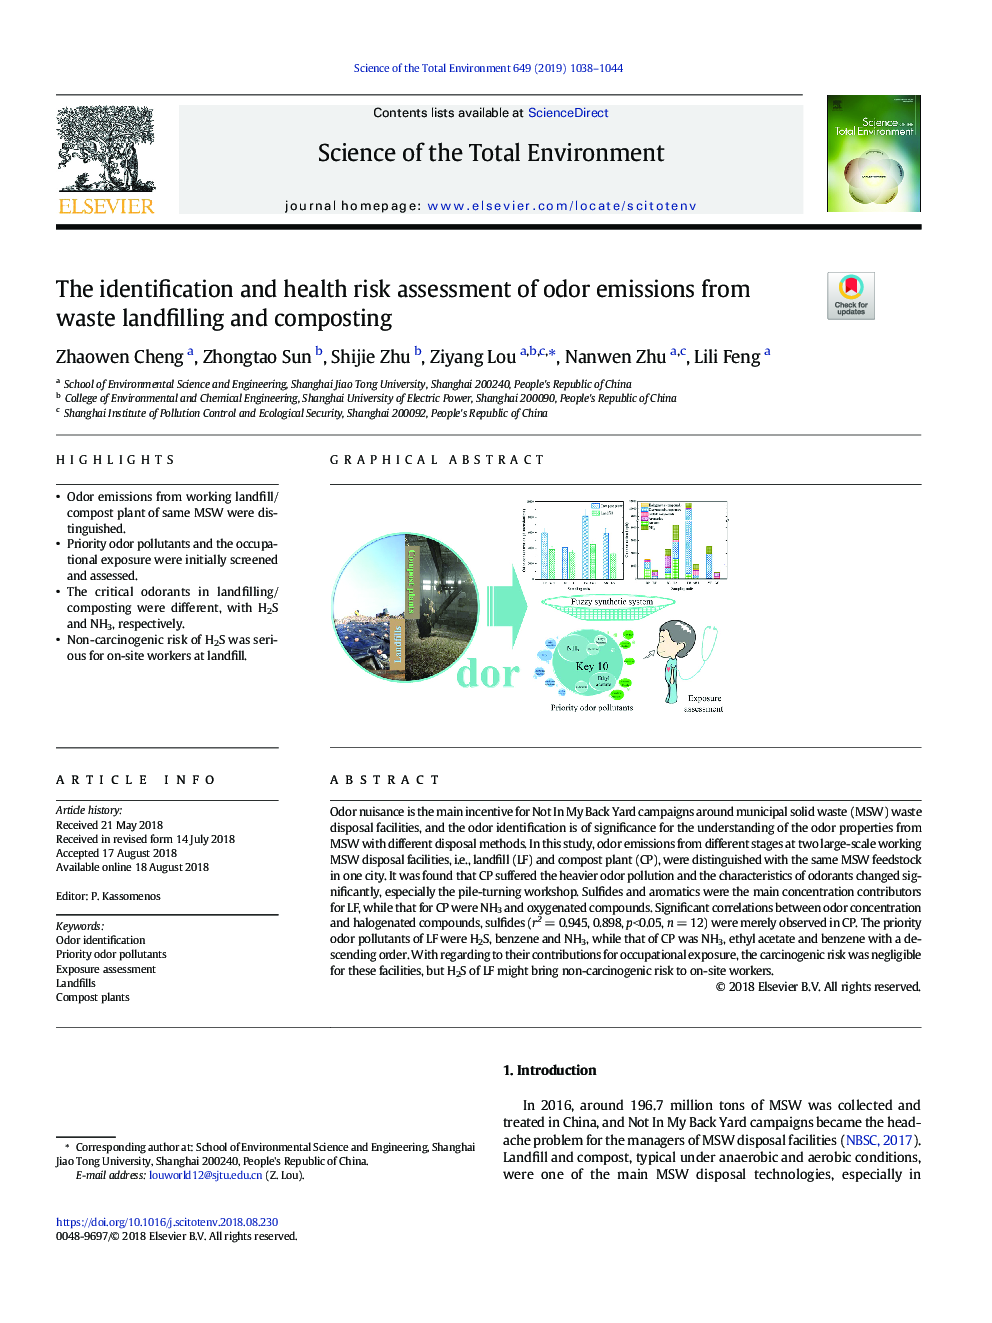 The identification and health risk assessment of odor emissions from waste landfilling and composting